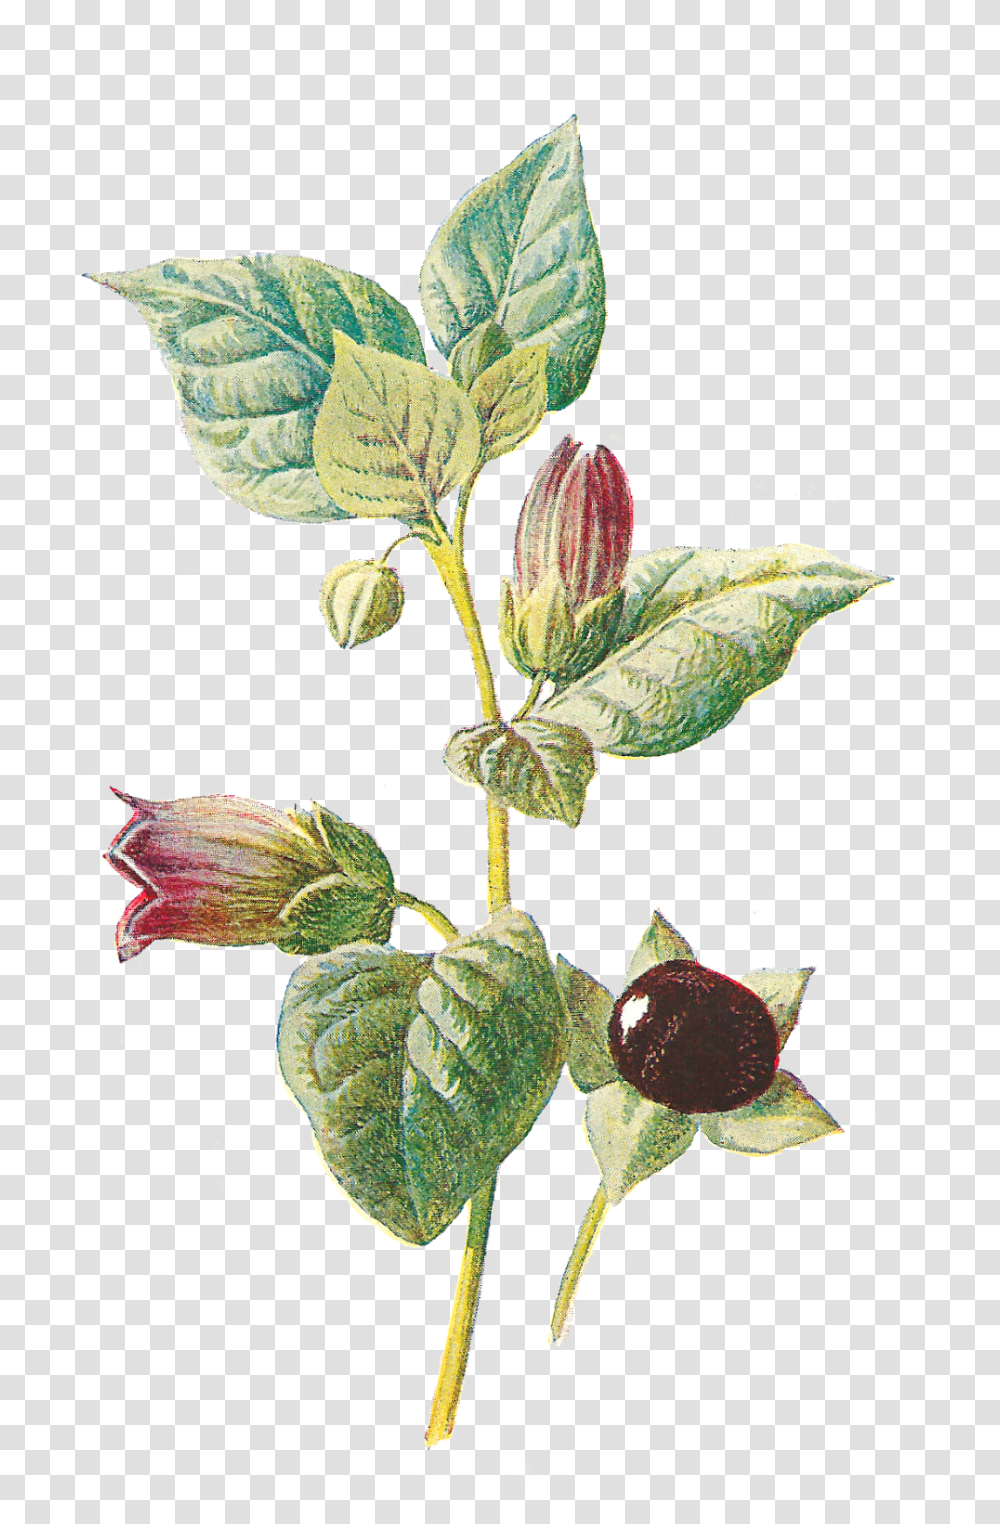 Flower Wildflower Deadly Nightshade Image Illustration Dwale Or Deadly Nightshade, Plant, Acanthaceae, Fruit, Food Transparent Png